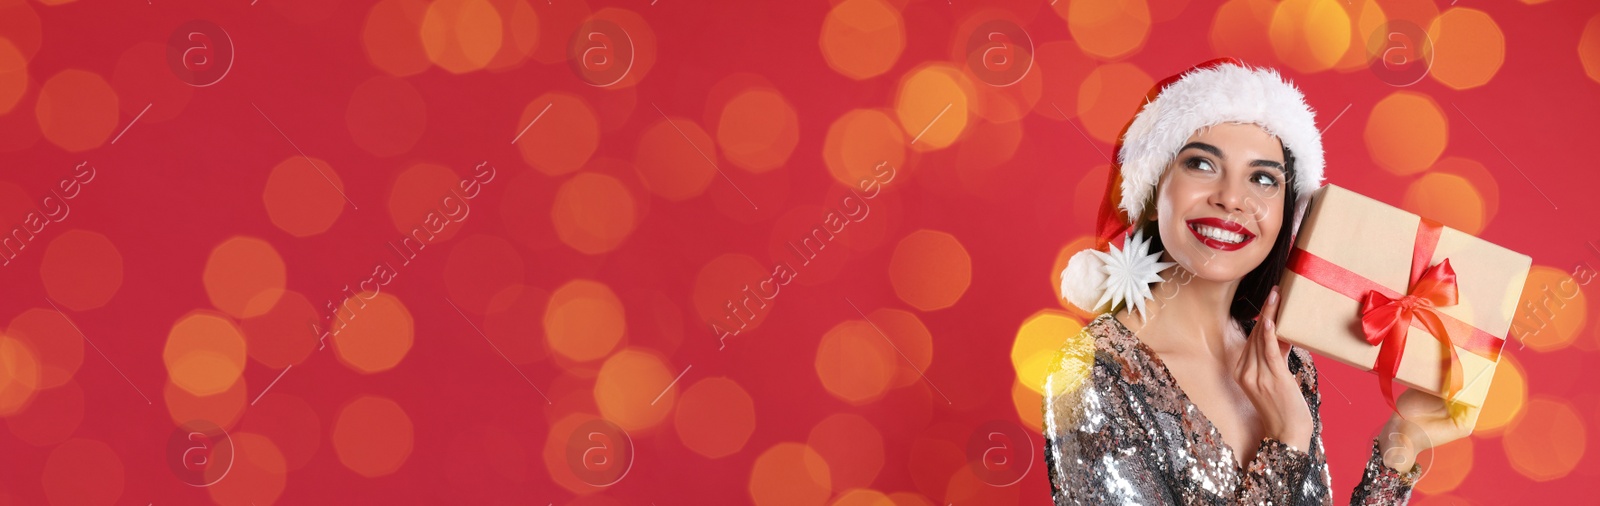 Image of Beautiful woman in Christmas hat holding gift box on red background, space for text. Banner design